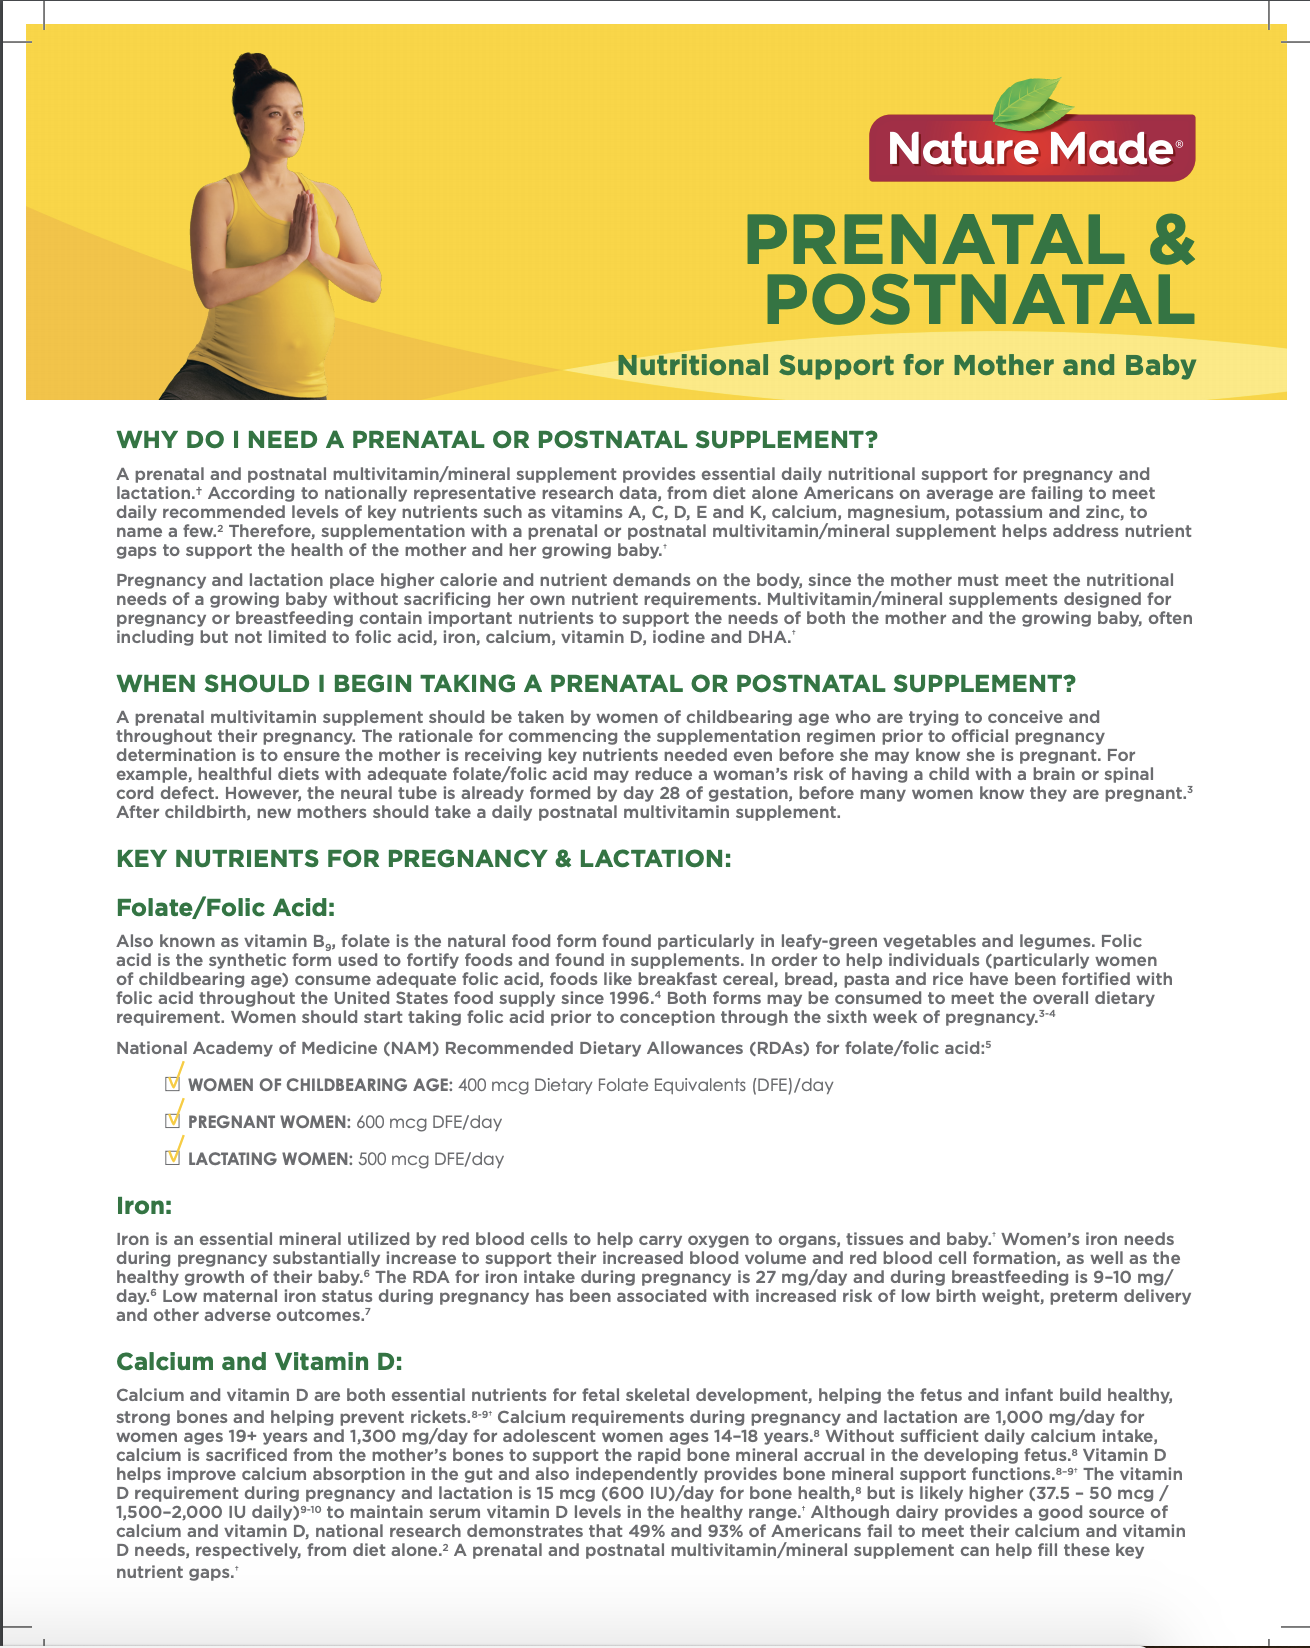 Prenatal & Postnatal—Daily Nutritional Support for Mother and Baby